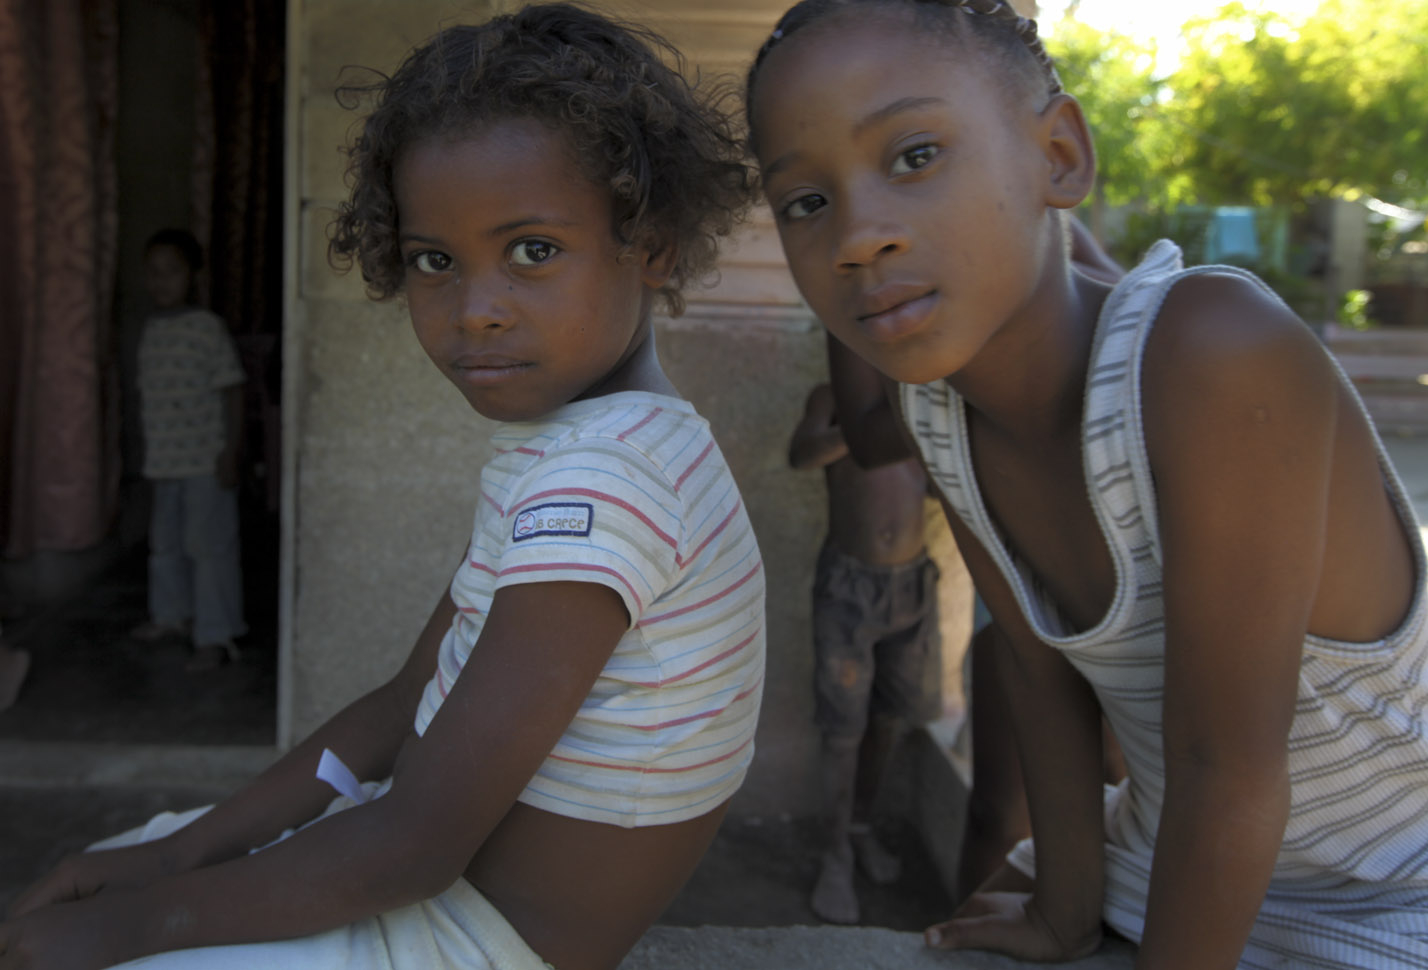 during volunteer work in the Dominican Republic : human beings : Gary Nolton - Photographer / Cinematographer 